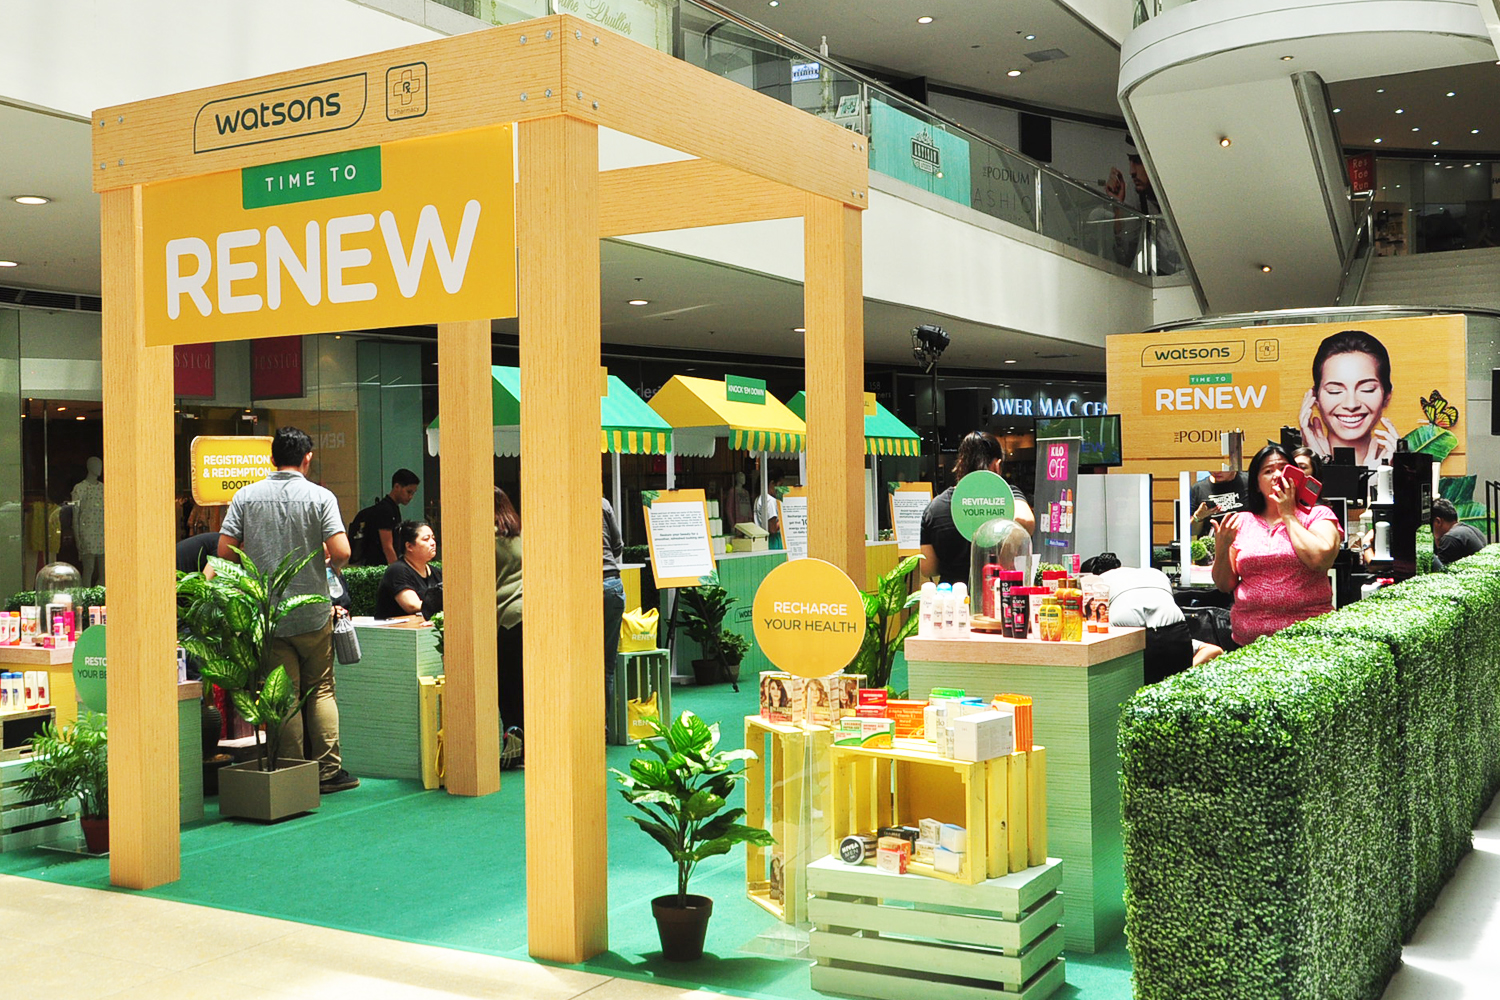 Watsons Time to Renew Campaign